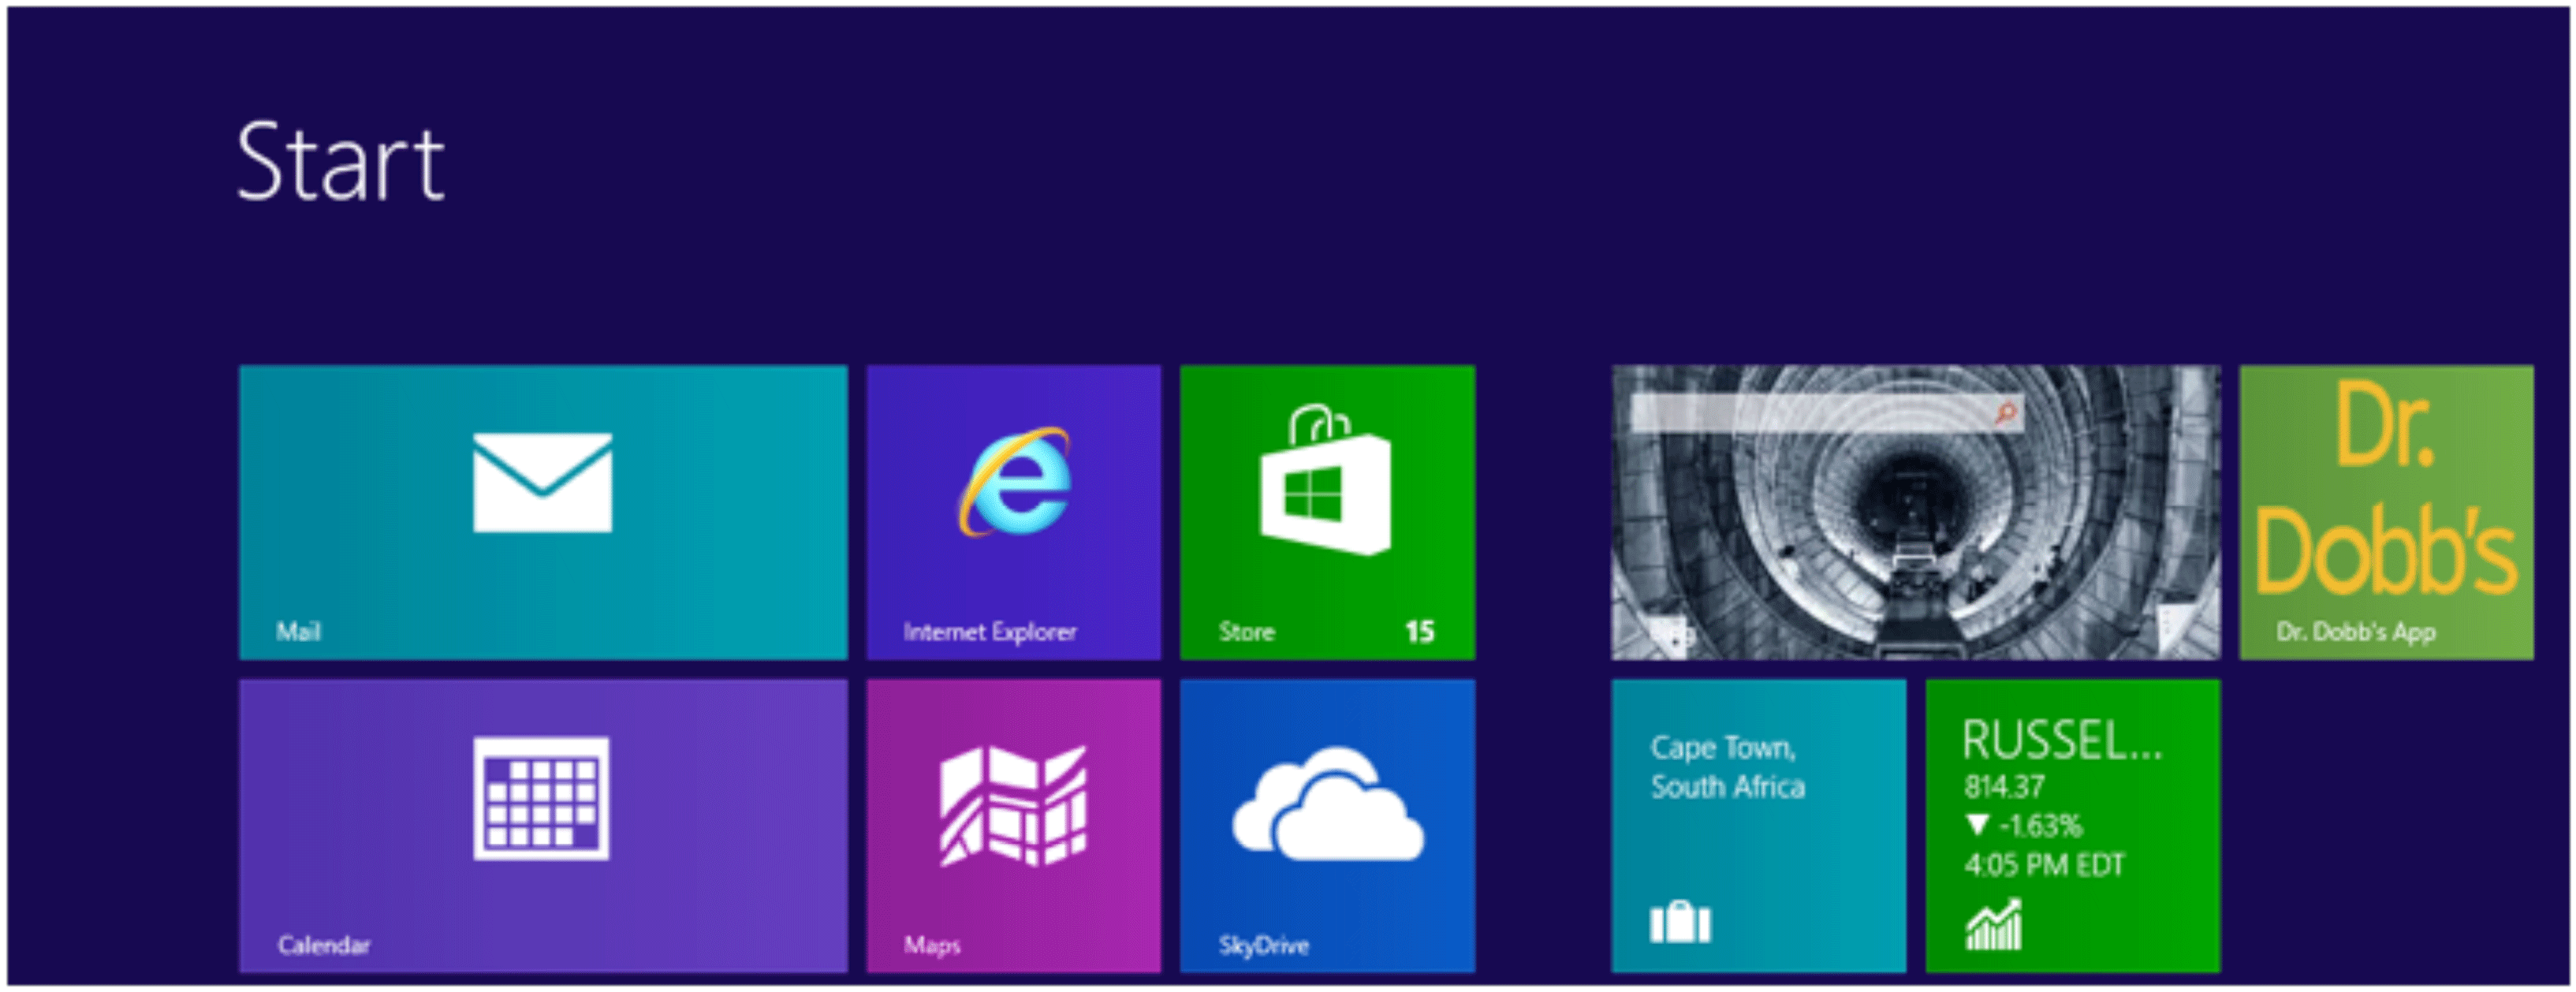 Windows Apps Logo - Customizing the Appearance of Windows 8 Apps. Dr Dobb's